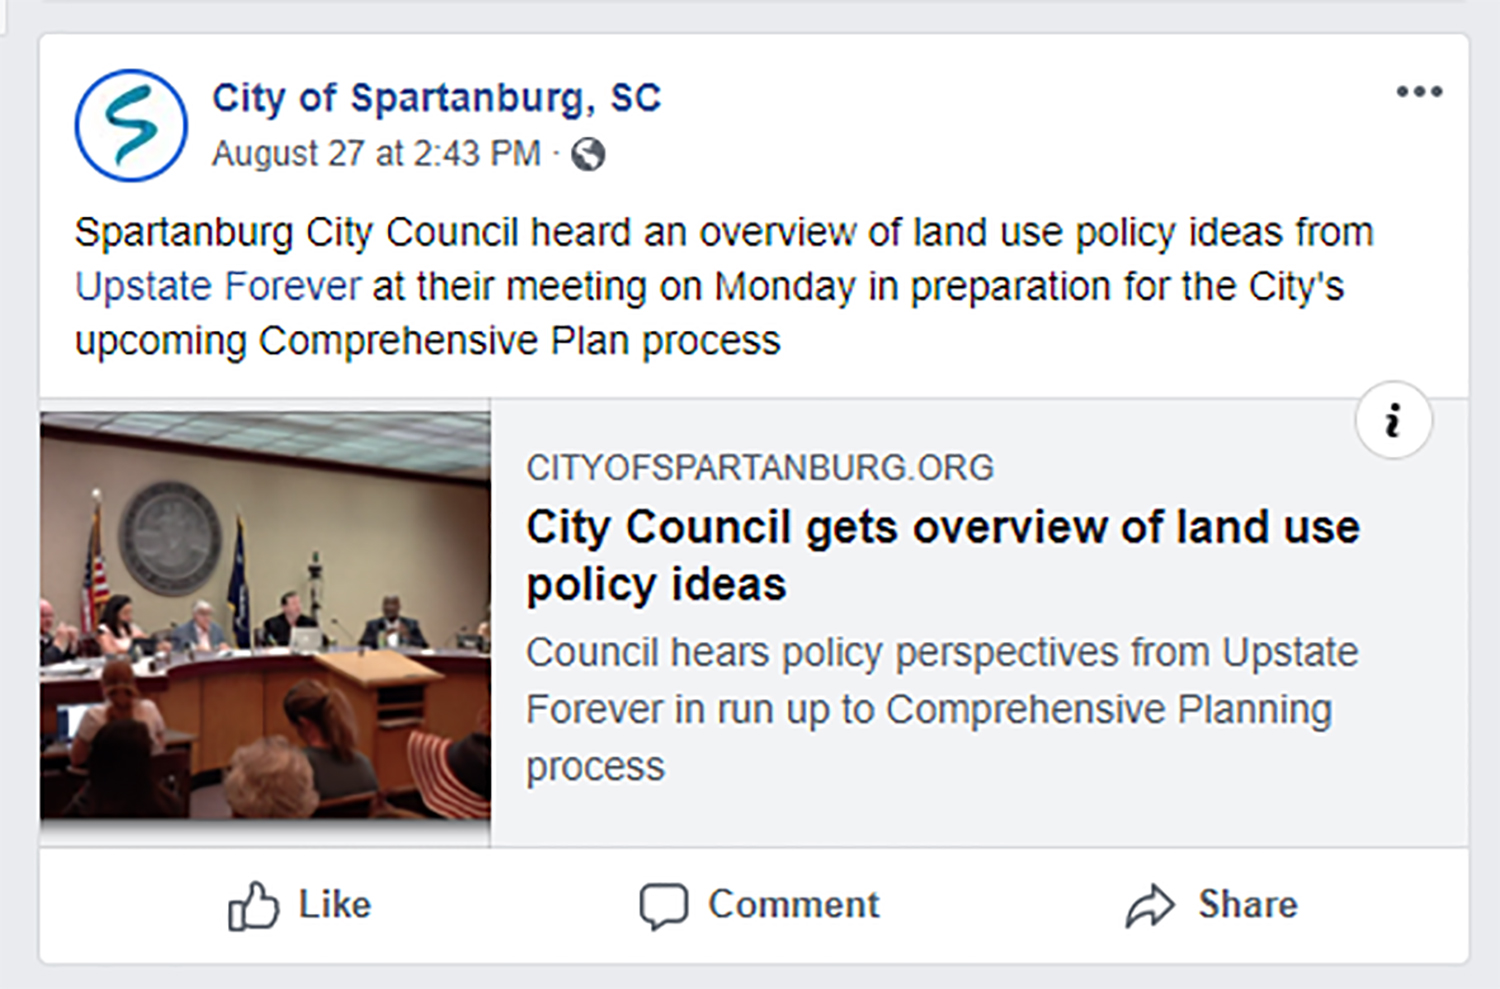 The City of Spartanburg’s social media includes videos and updates about city council meetings